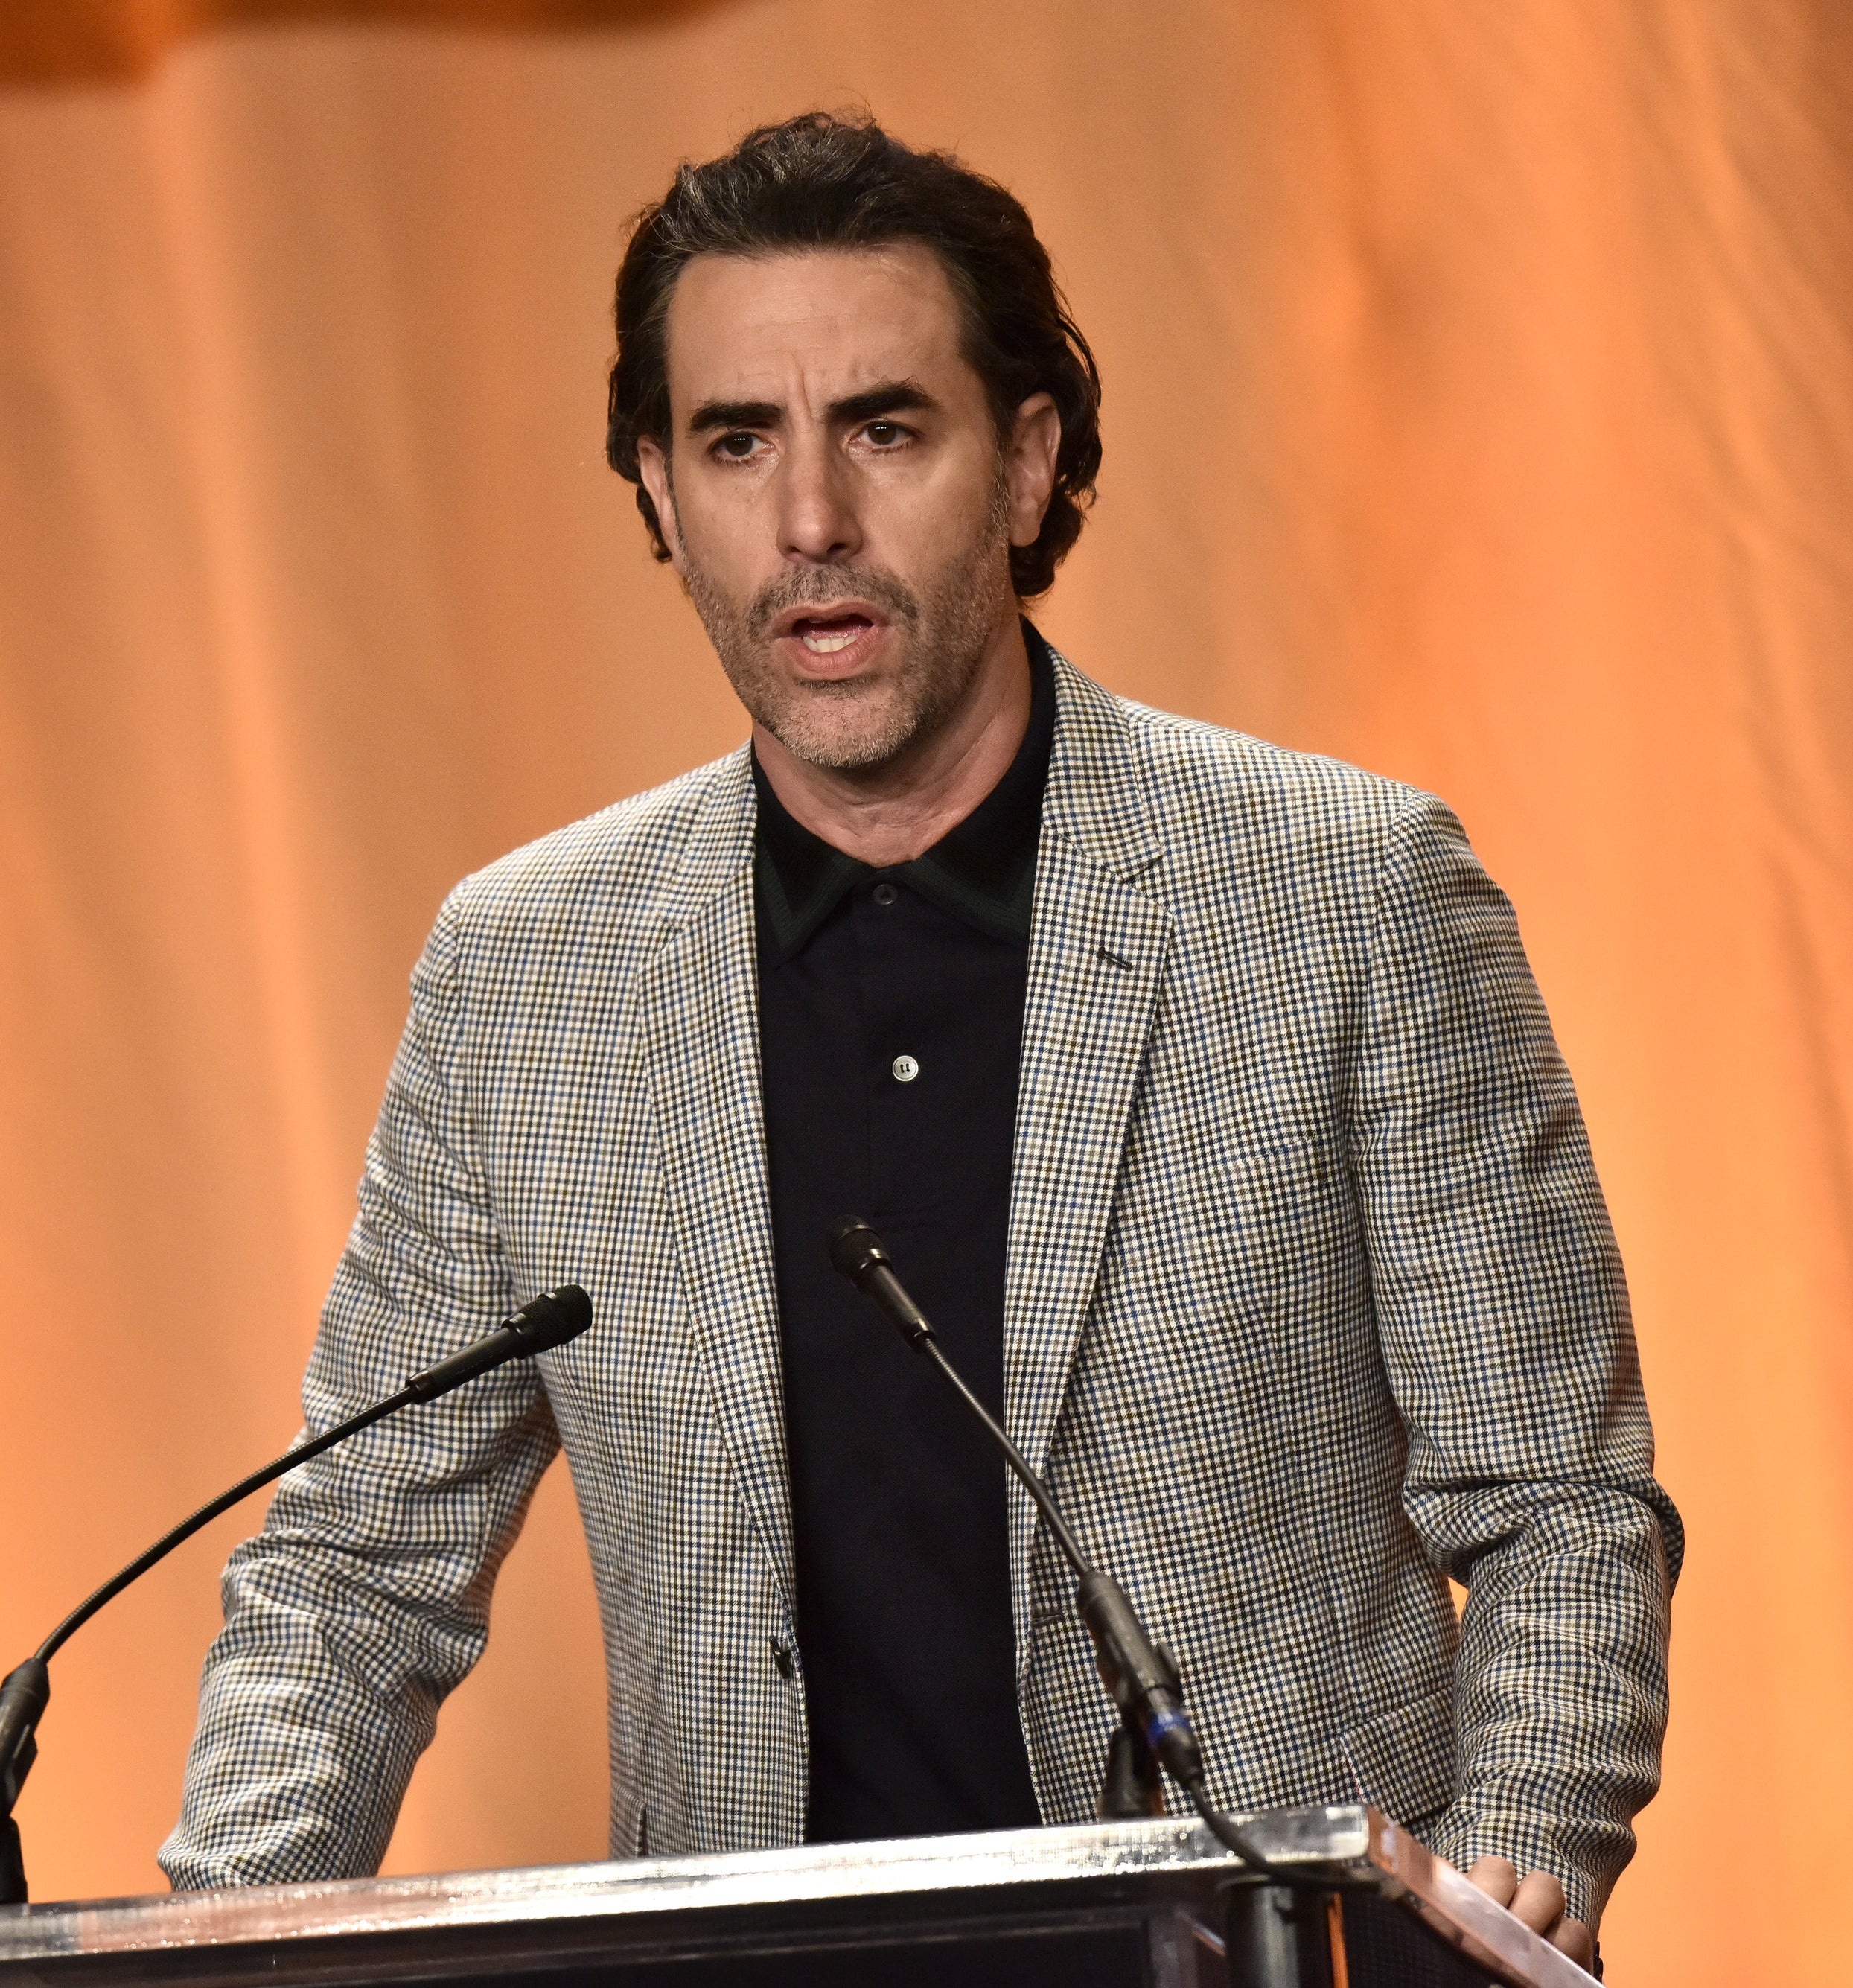 Sacha in a checkered suit and black shirt speaking at a podium